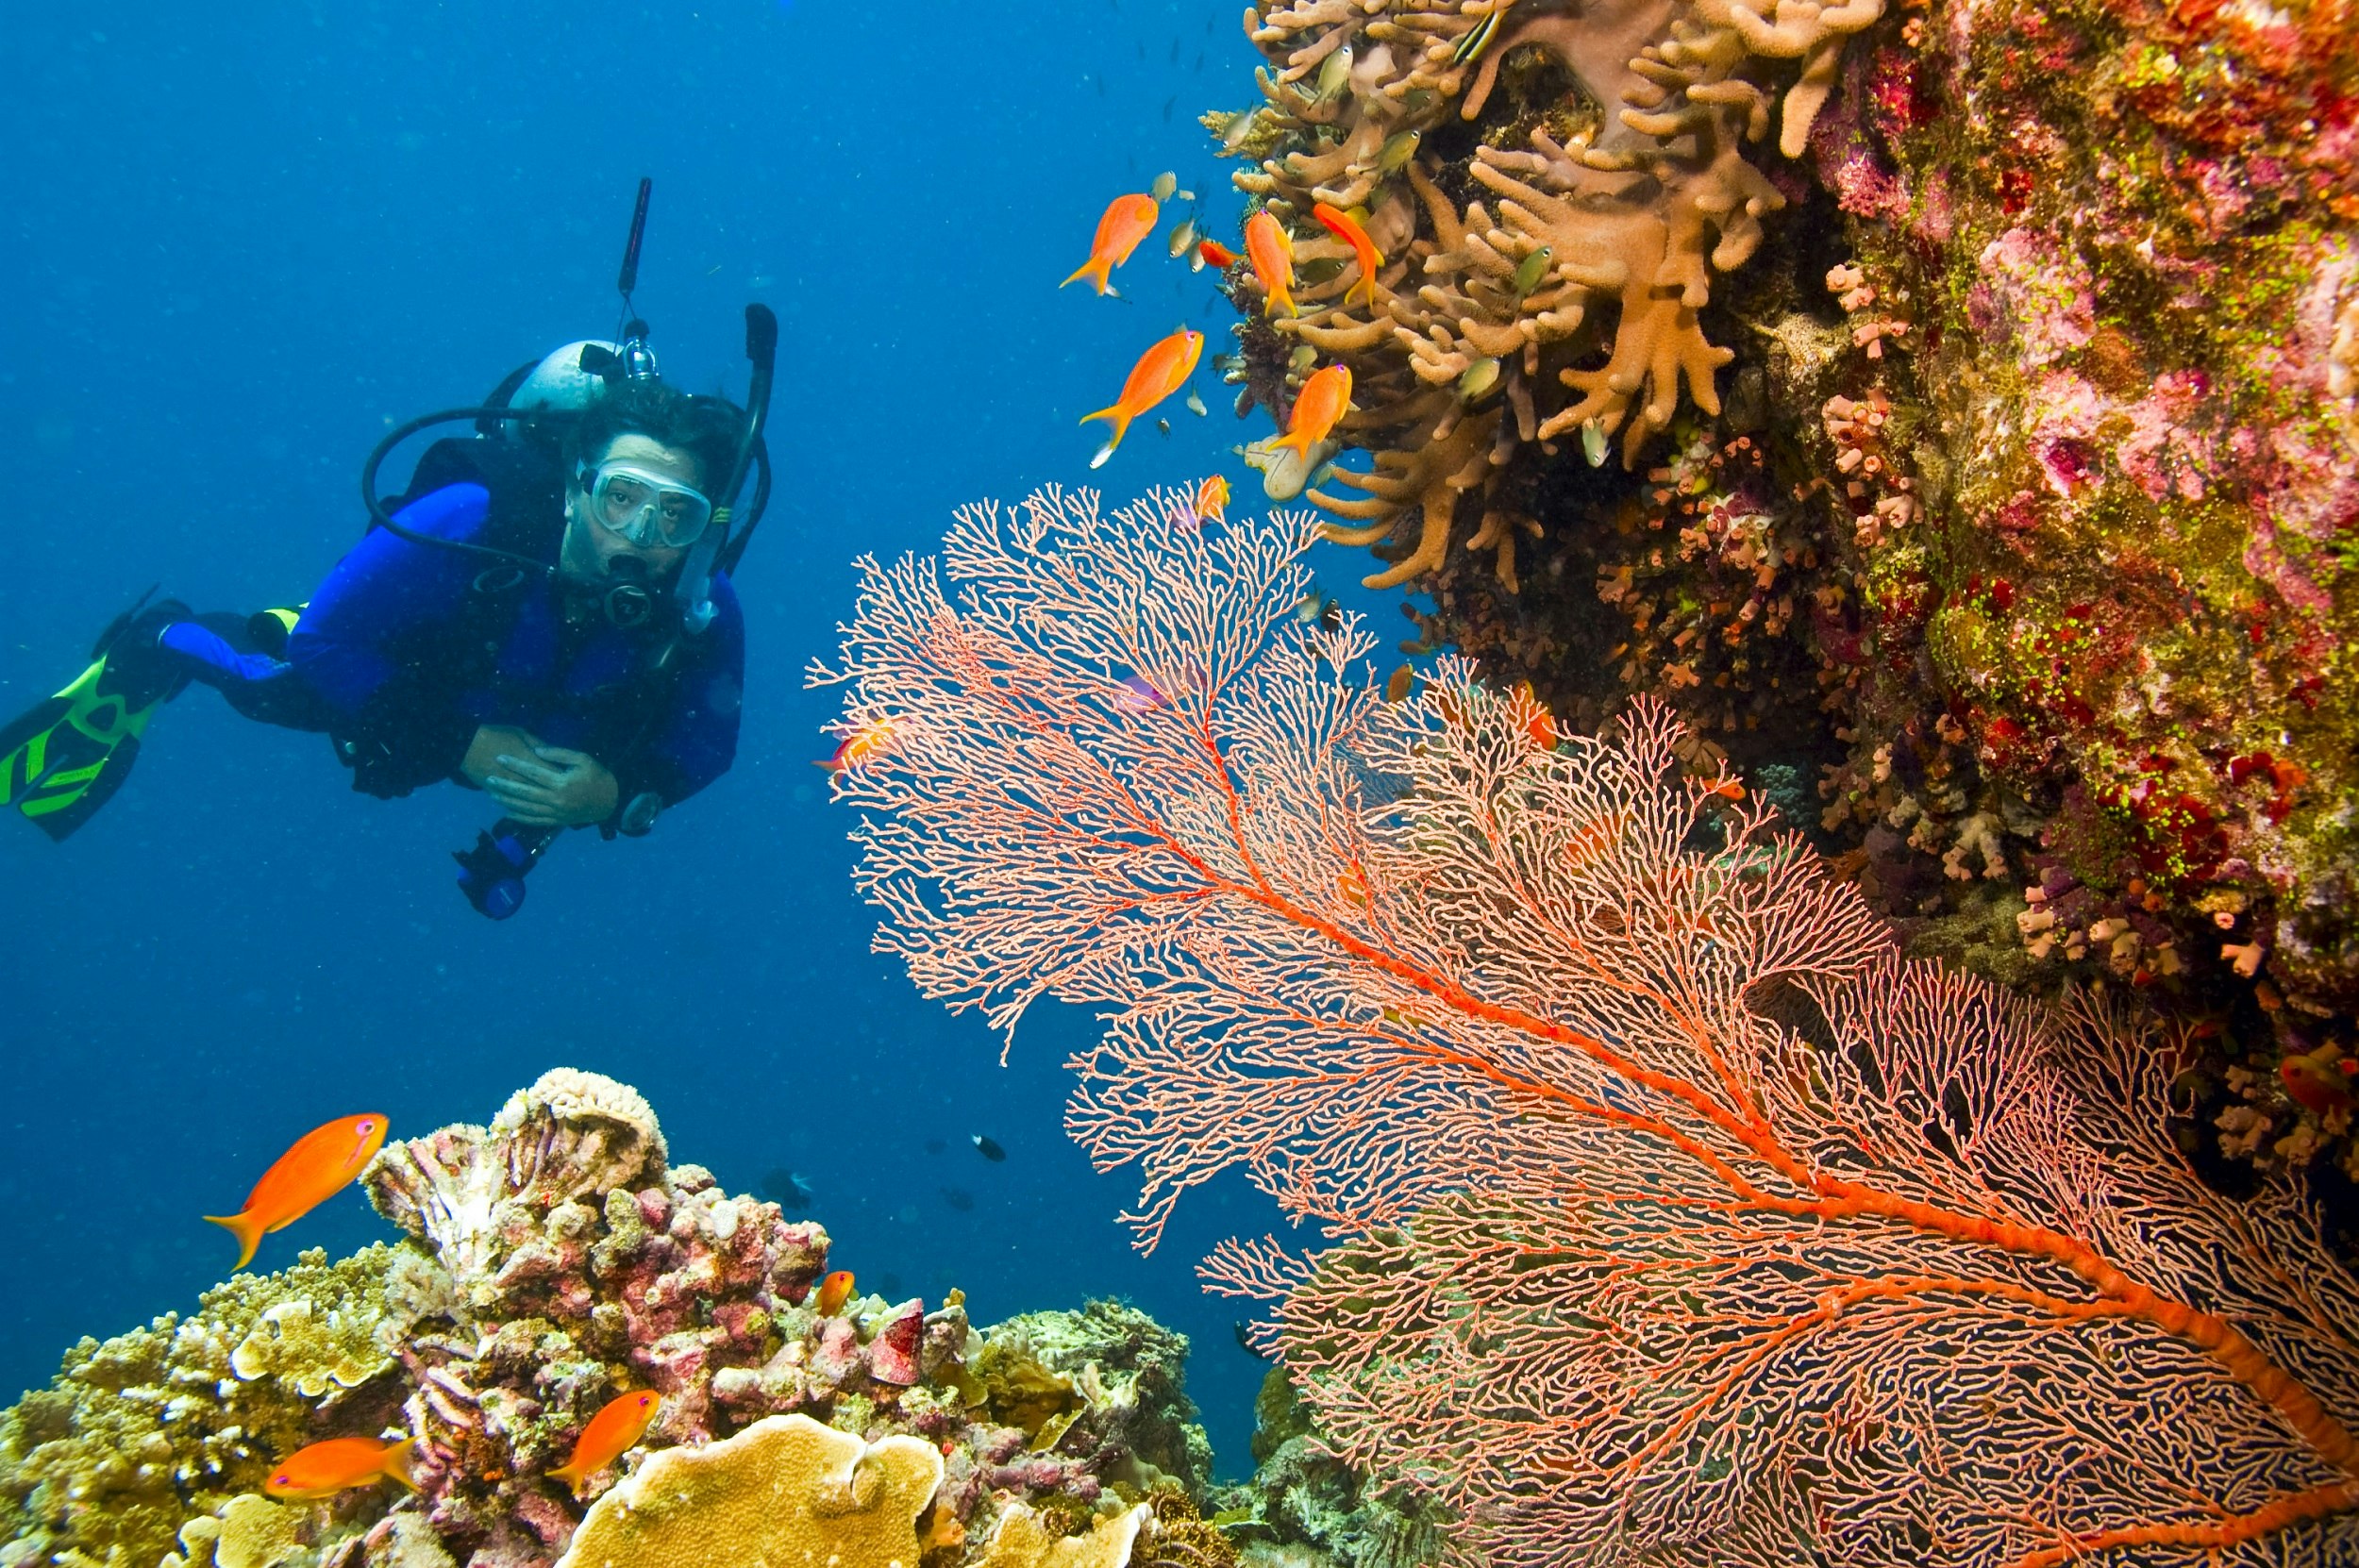 A single diver looks at a large fan of orange coral. Several bright orange fish stay close to the reef.